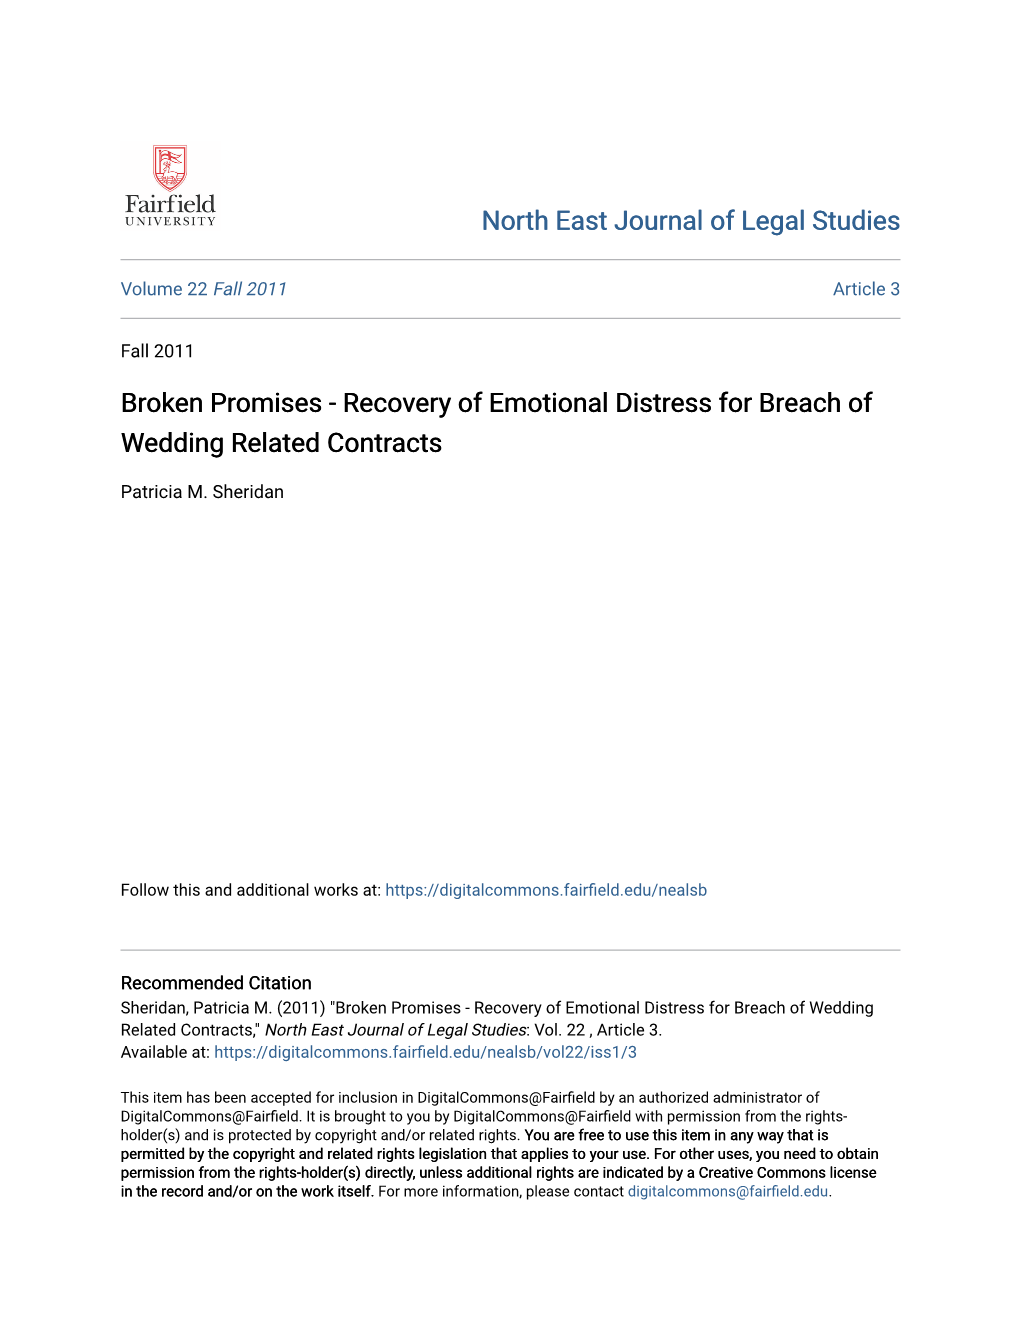 Recovery of Emotional Distress for Breach of Wedding Related Contracts